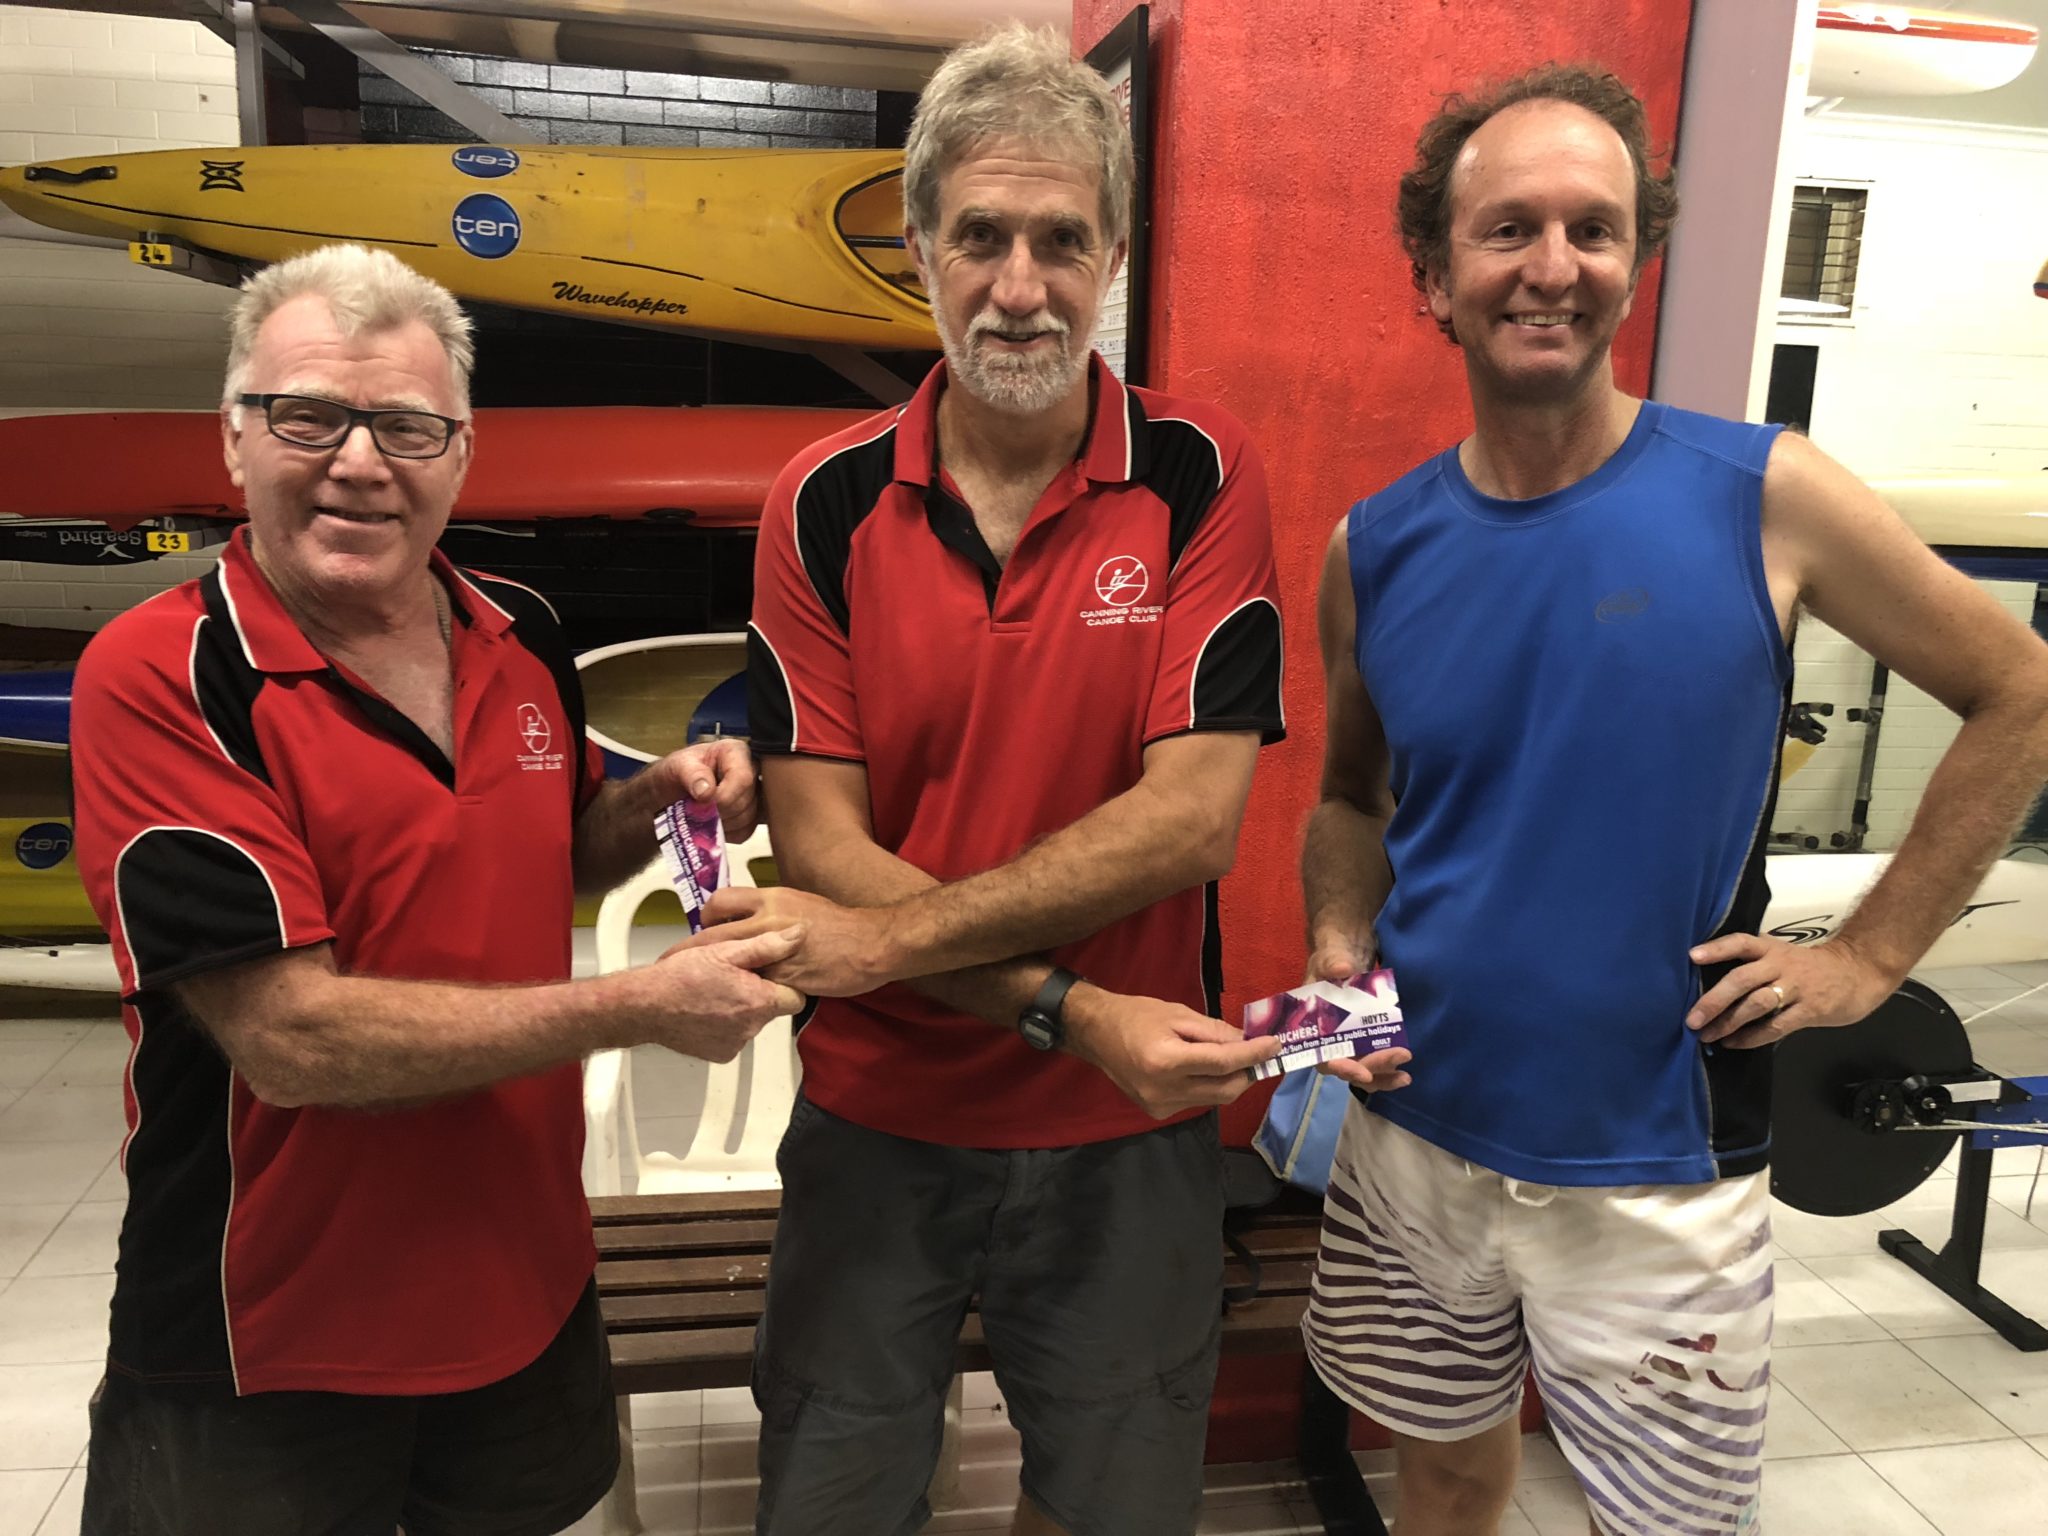 Tuesday 13th March 2018 : Tonights photo shows Committee member Steve Coward presenting David Gardiner and Chris Graham with movie vouchers.